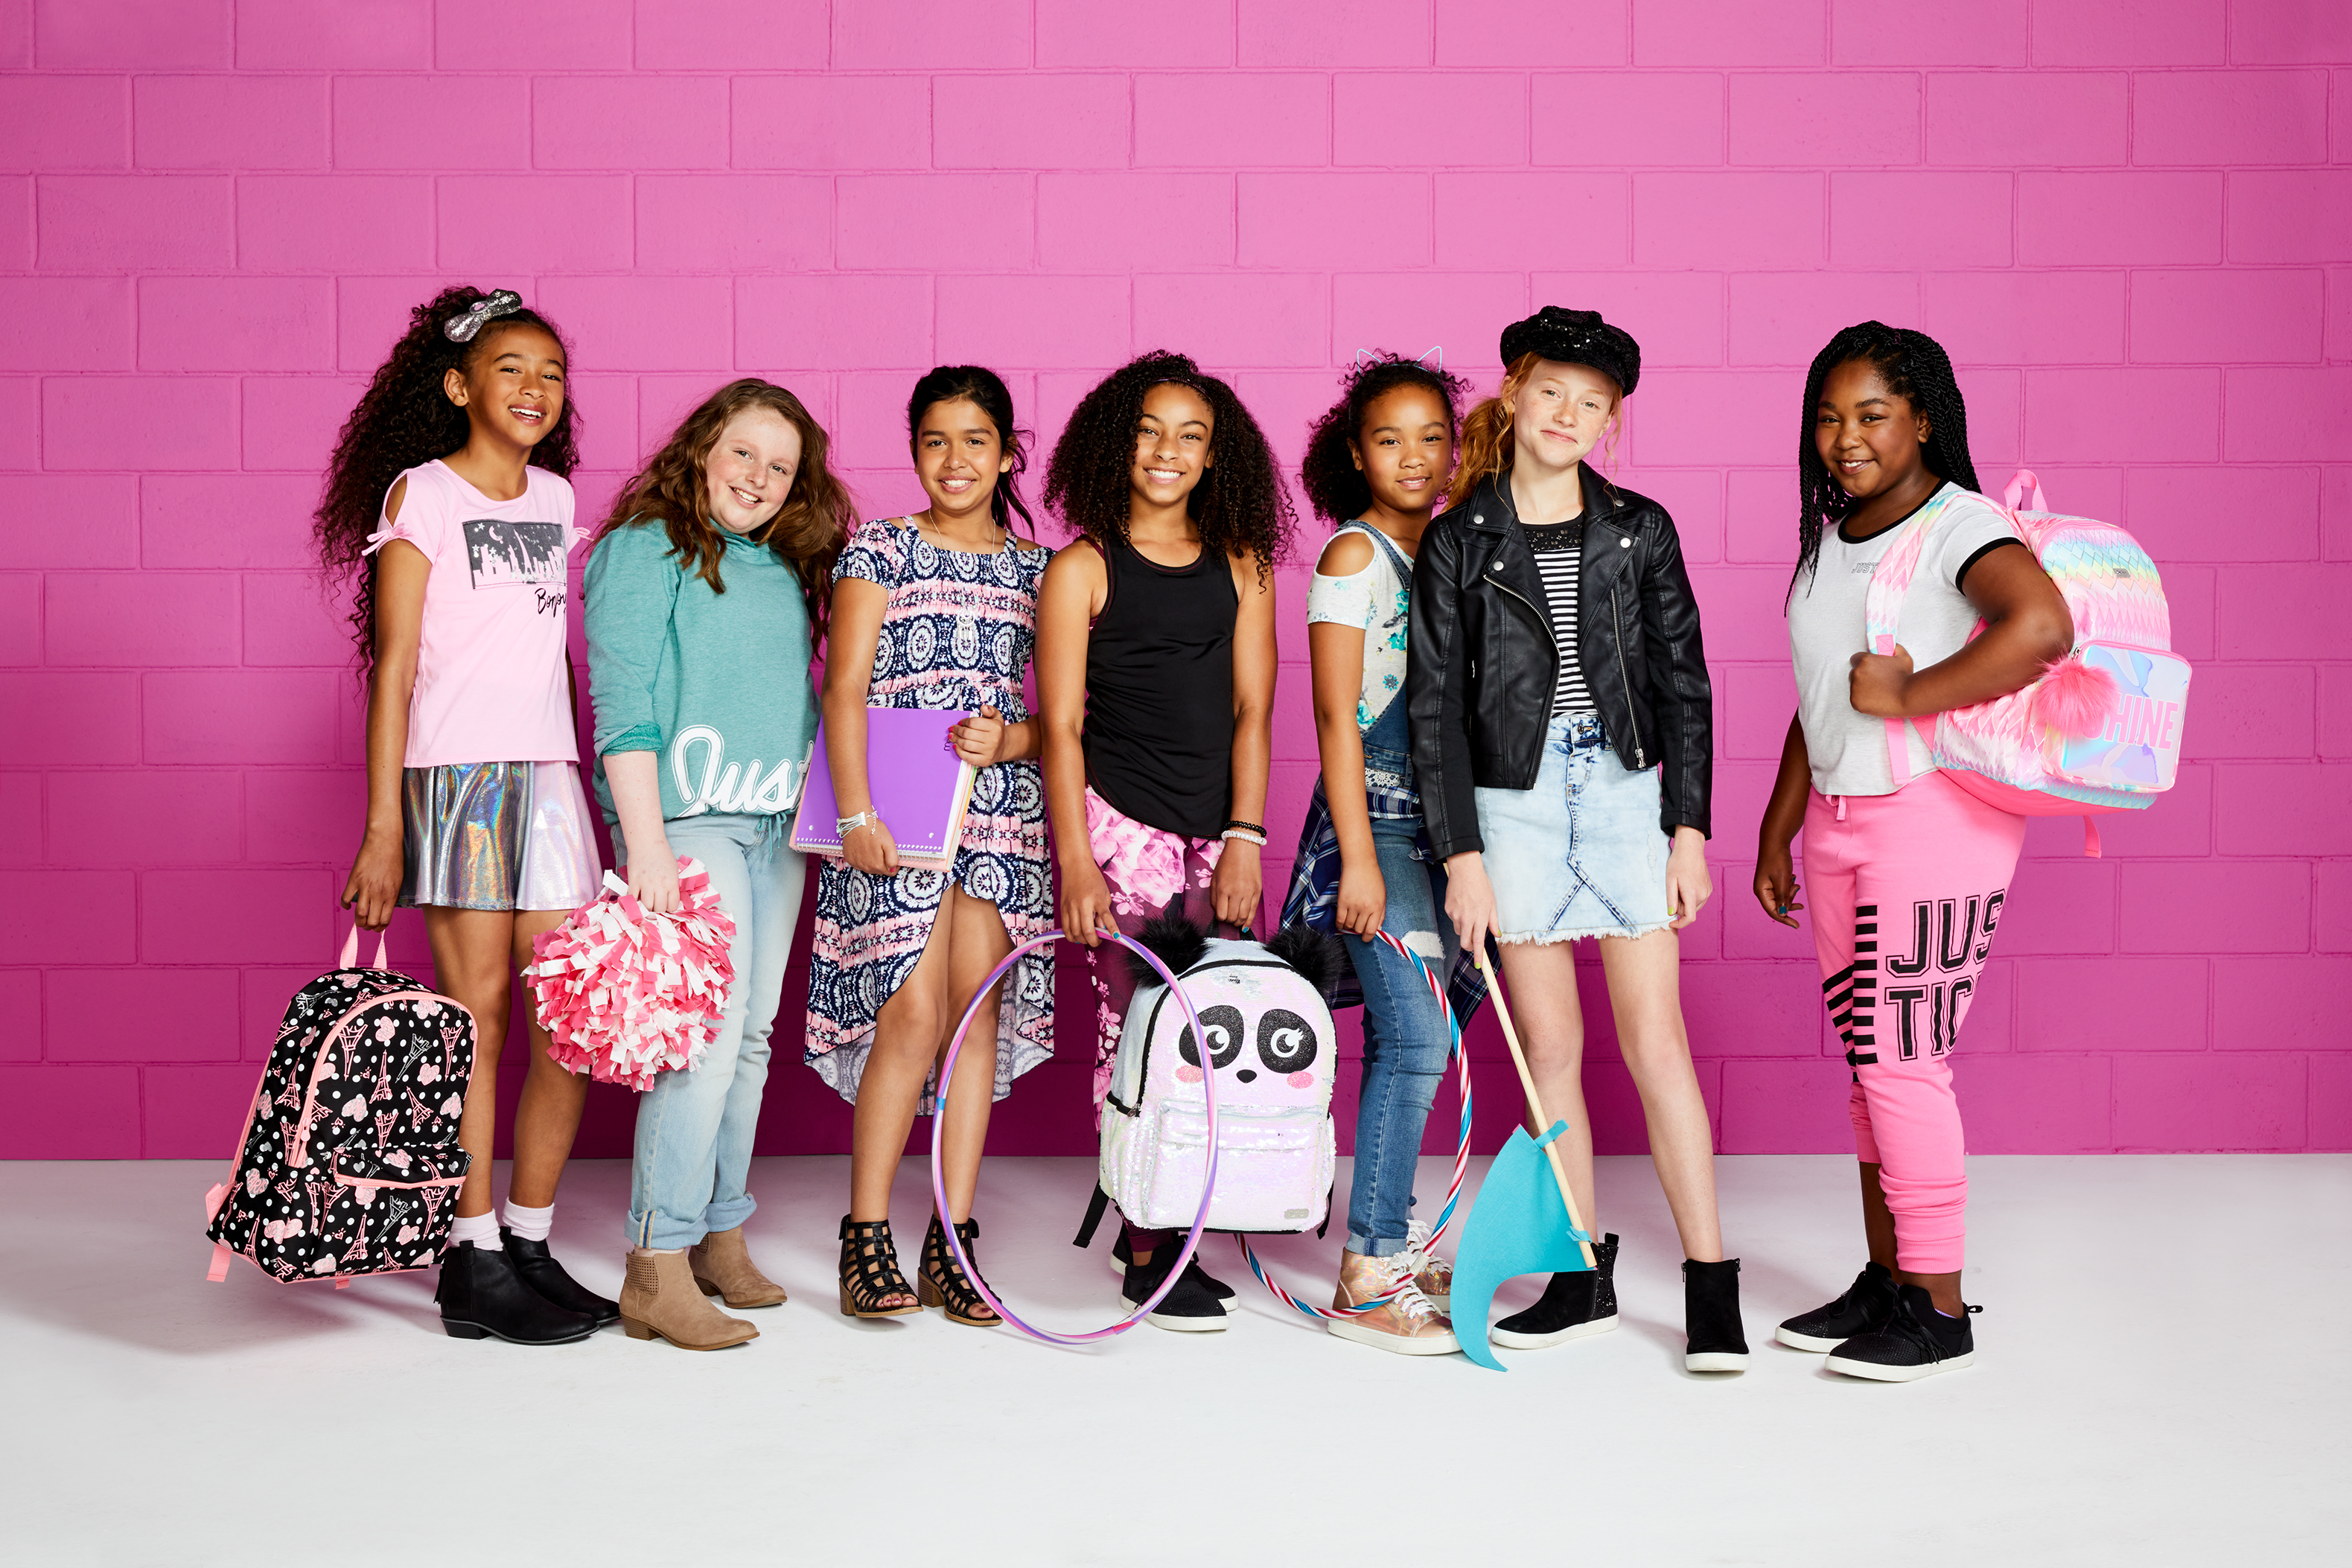 Justice Launches “We are Justice” Back-to-School Campaign